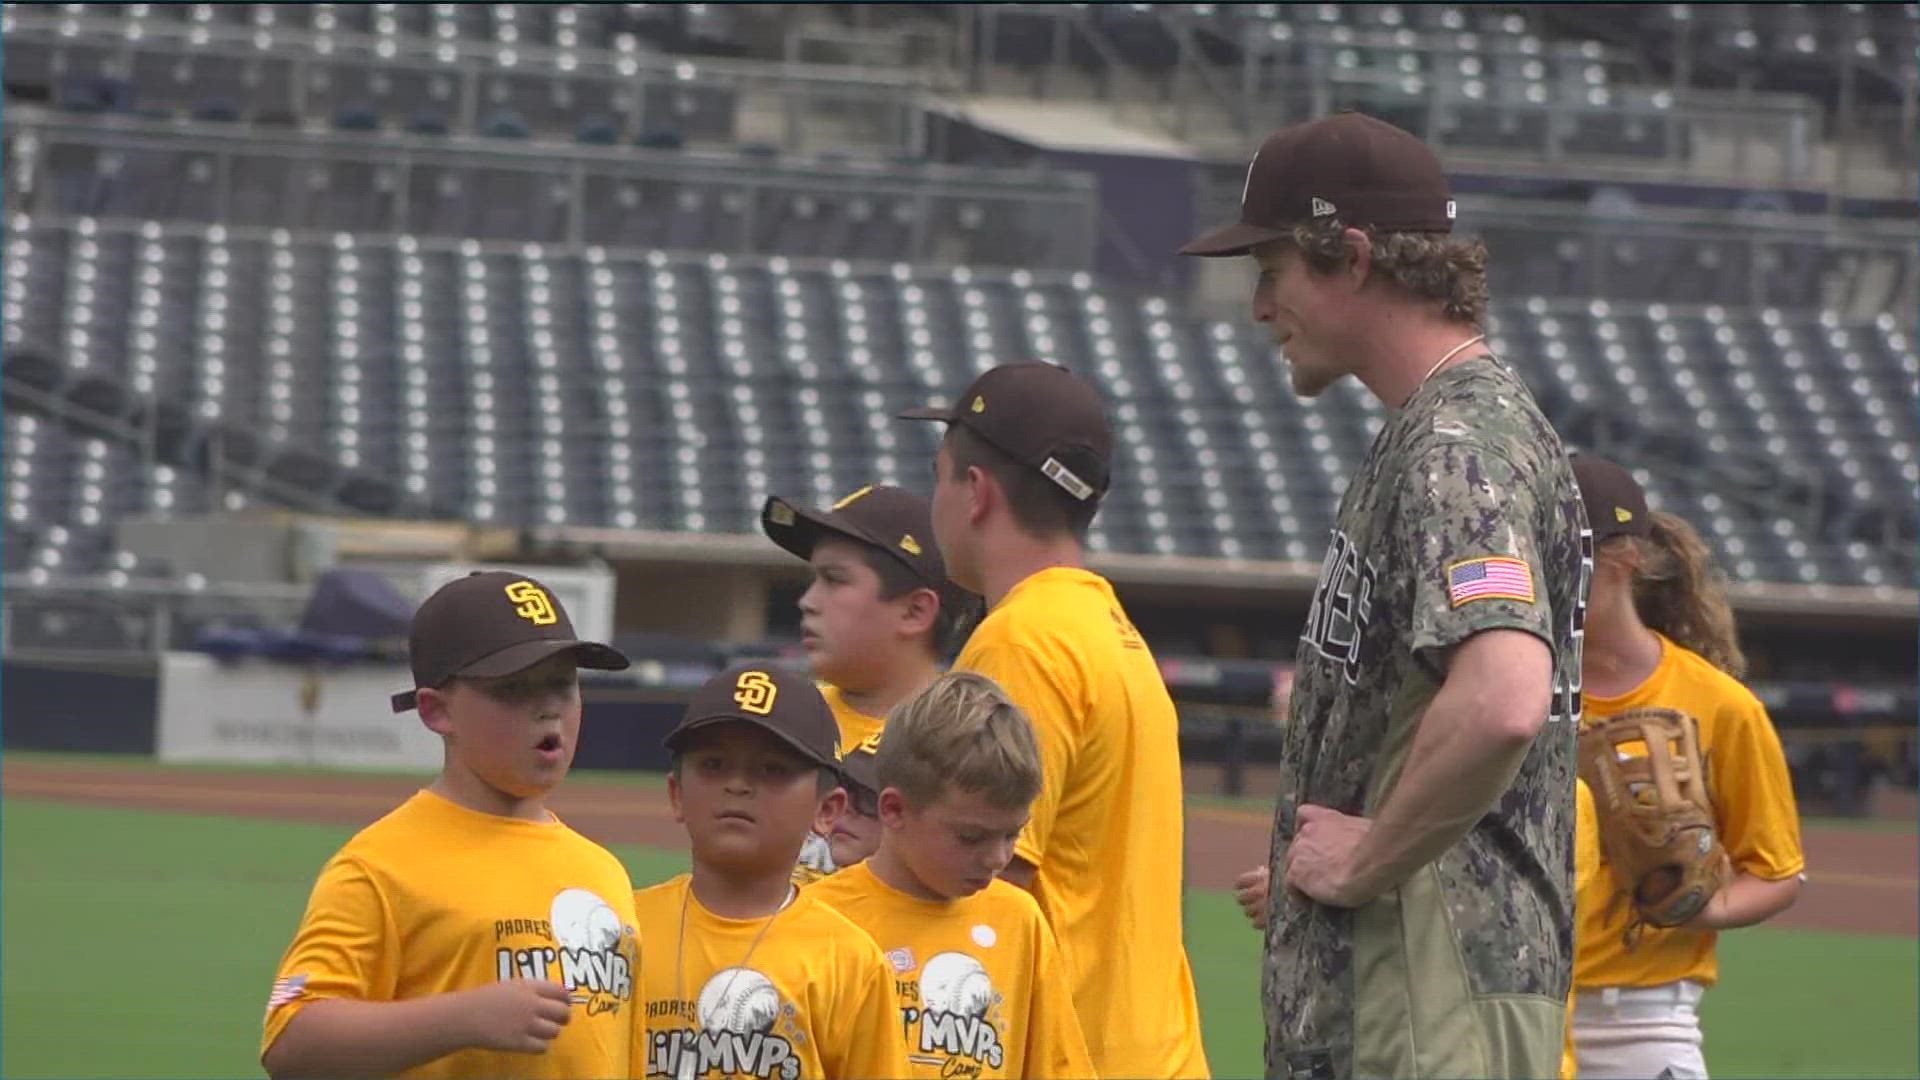 Fifty young Padre fans were able to experience a once in a lifetime event at Petco Park thanks to the “USAA’s Salute to Service Lil’ MVPs Baseball Camp.”